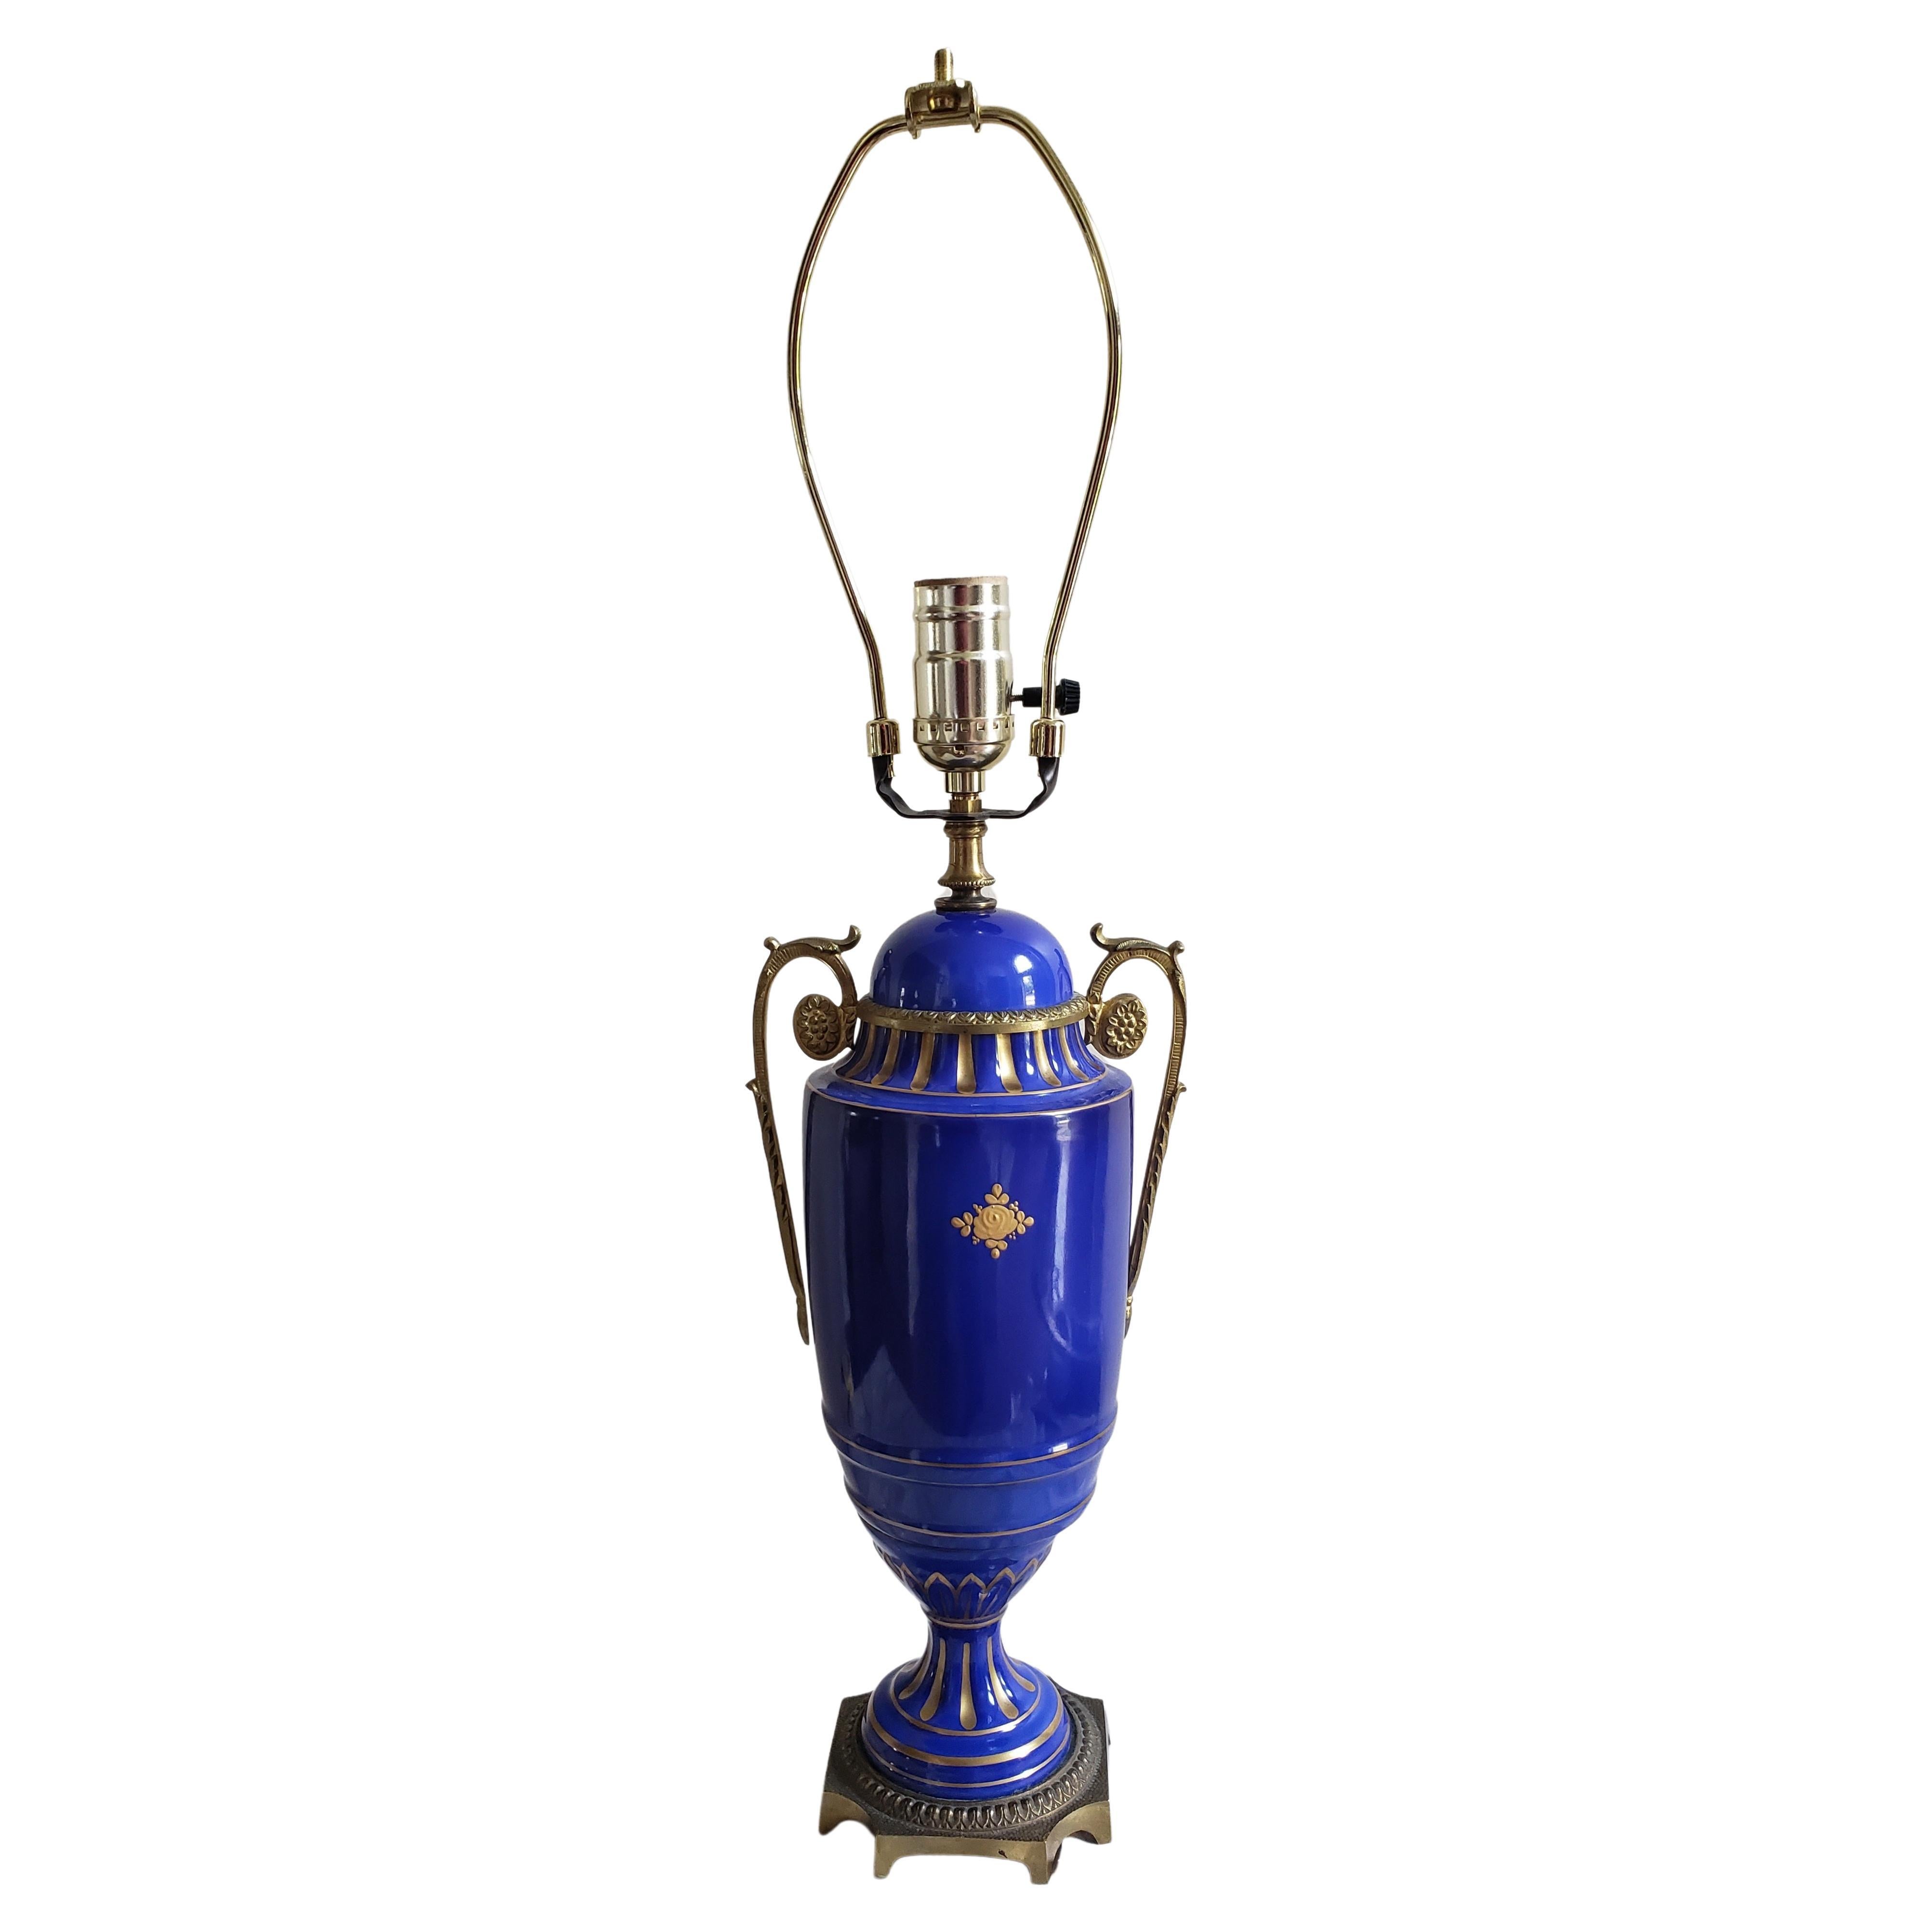 1920s FBS Limoges Continental Blue Cobalt Porcelain, hand painted and  Gilt decorated Vase Mounted as Lamp.
Measures 6